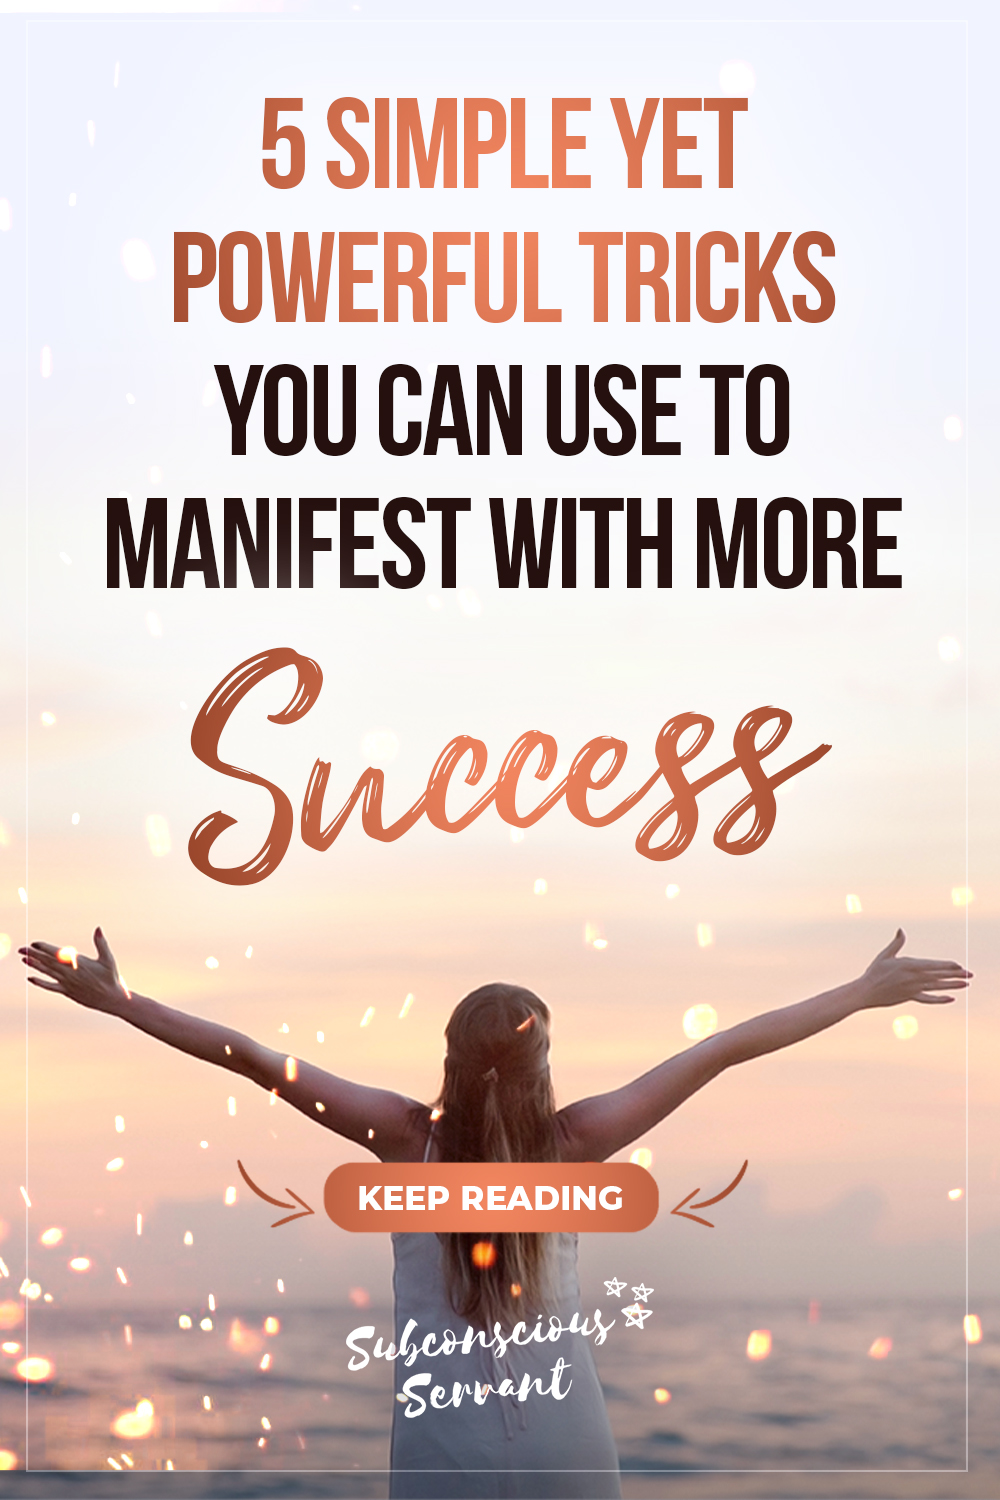 5 Simple Yet POWERFUL Tricks for Manifesting With More Success